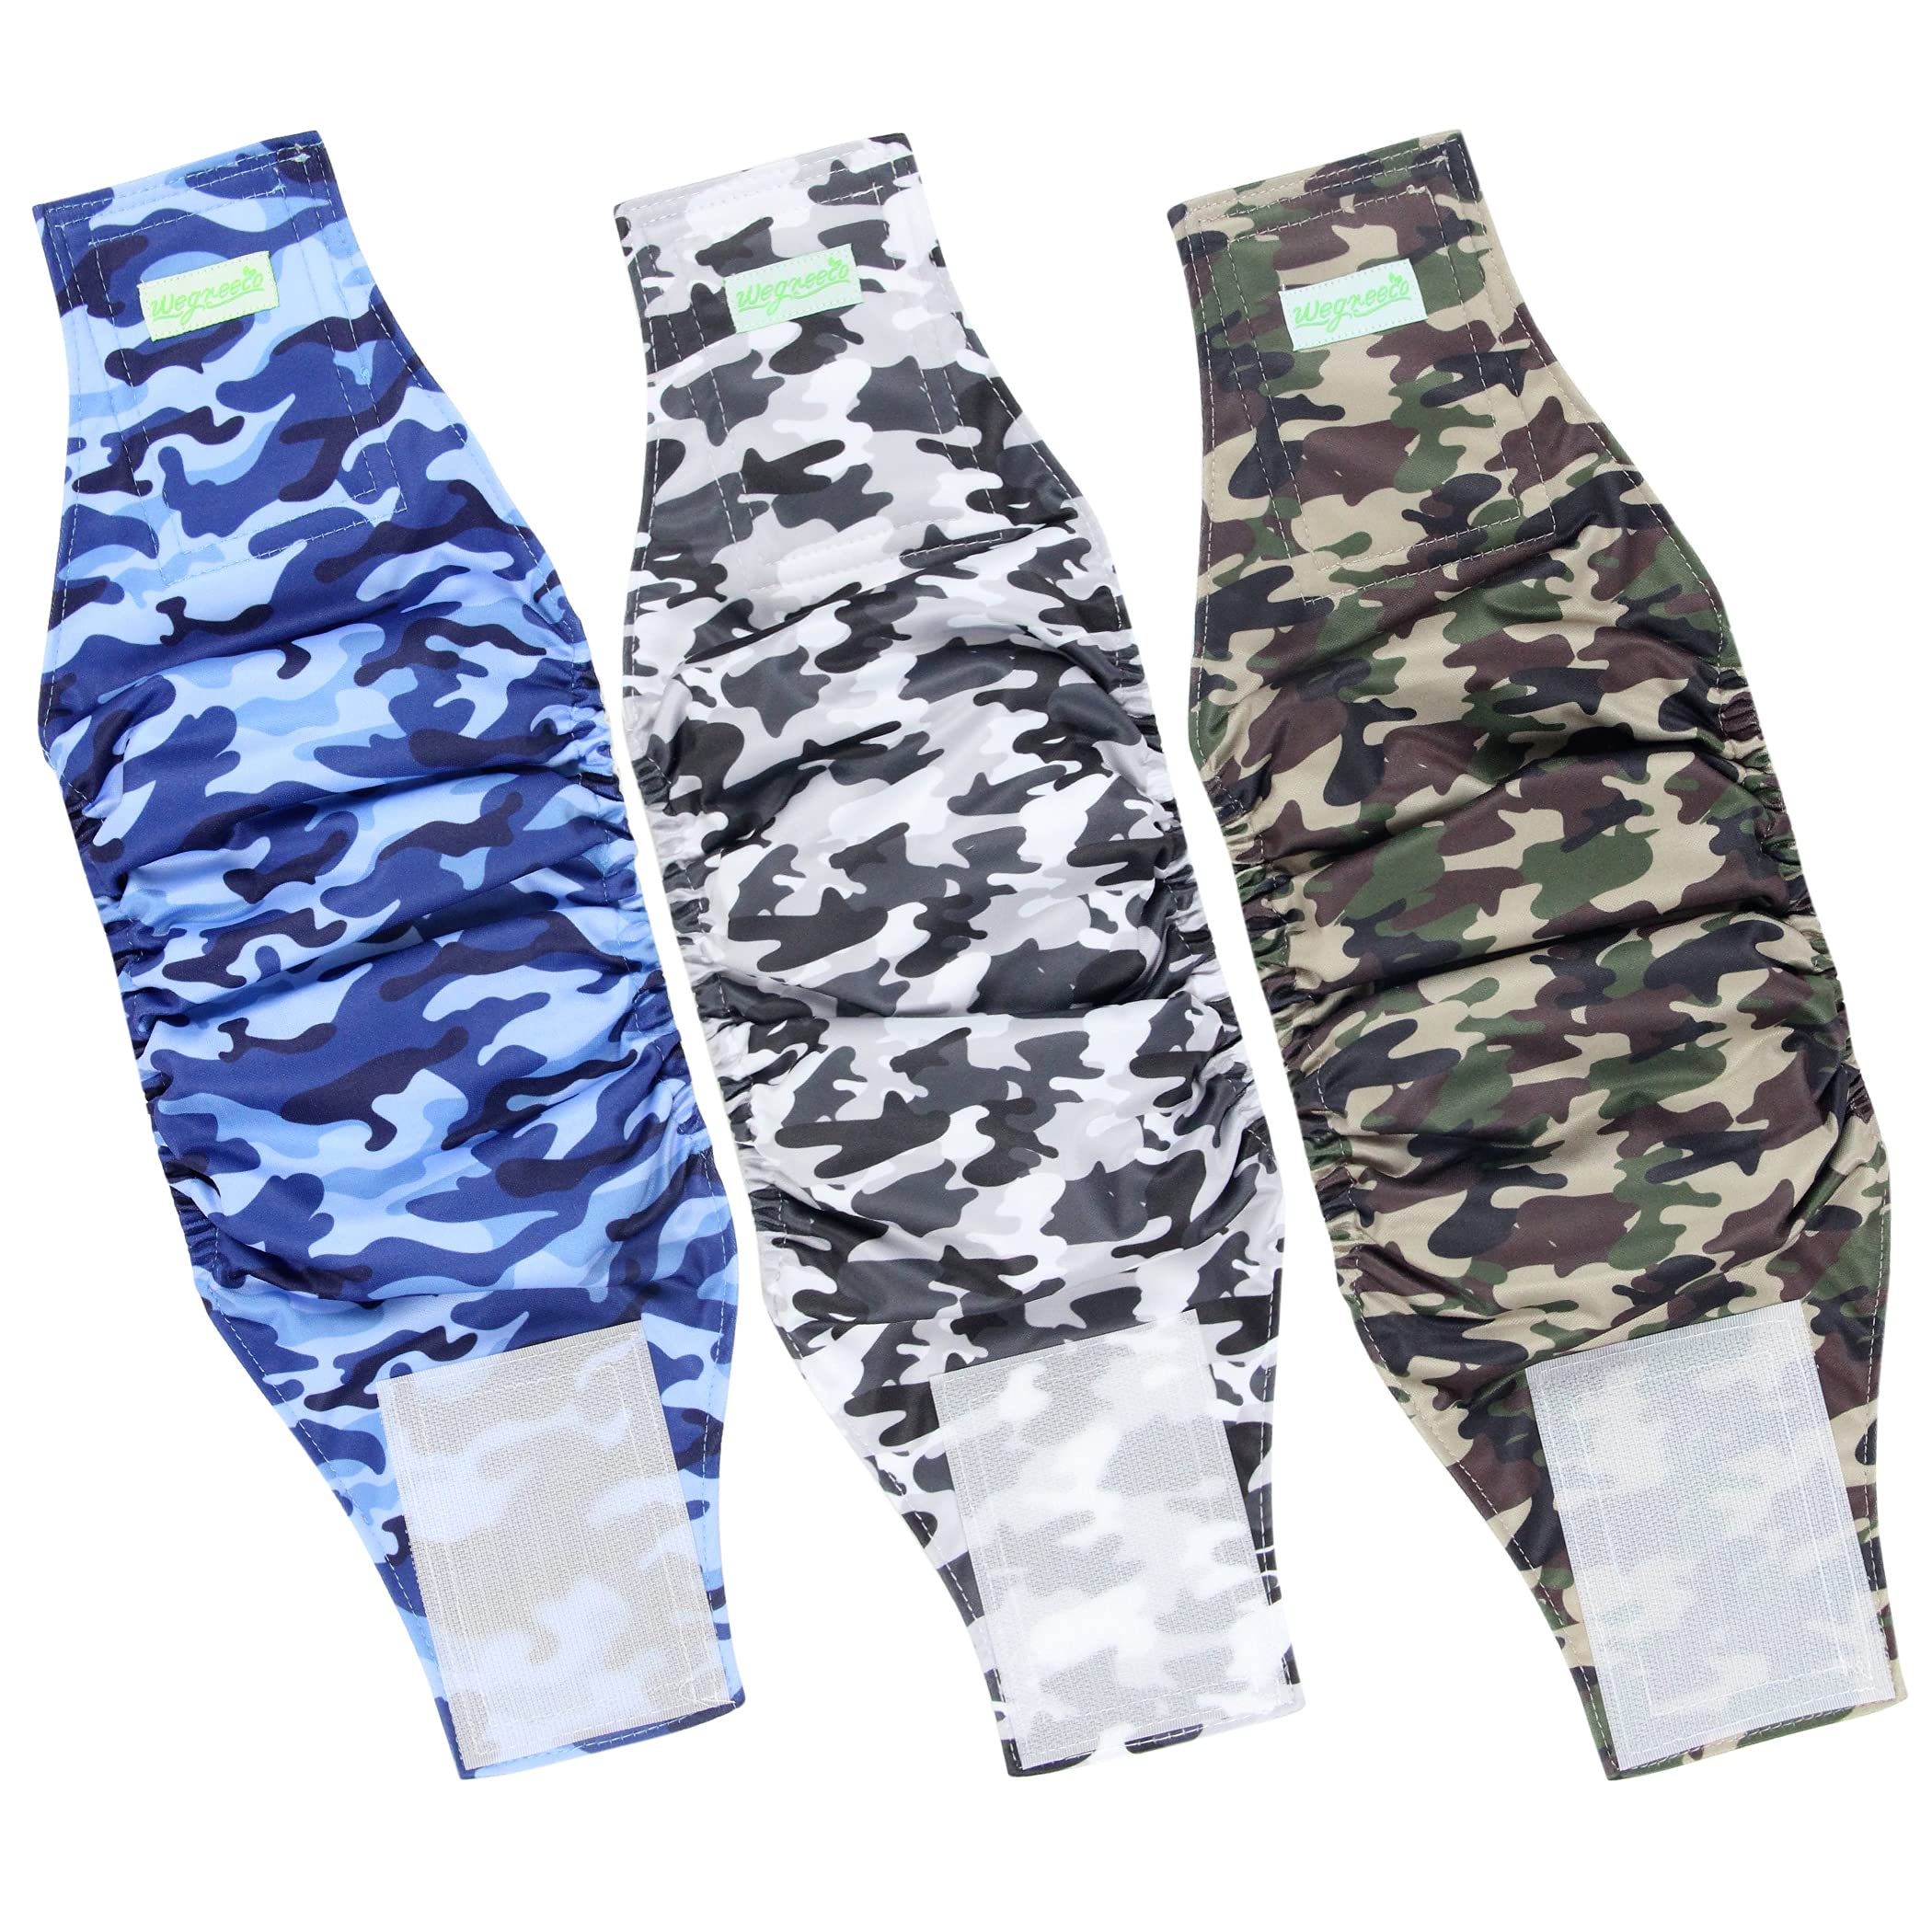 Dog Belly Band, Male Dog Diapers, 3-Pack (Camo)